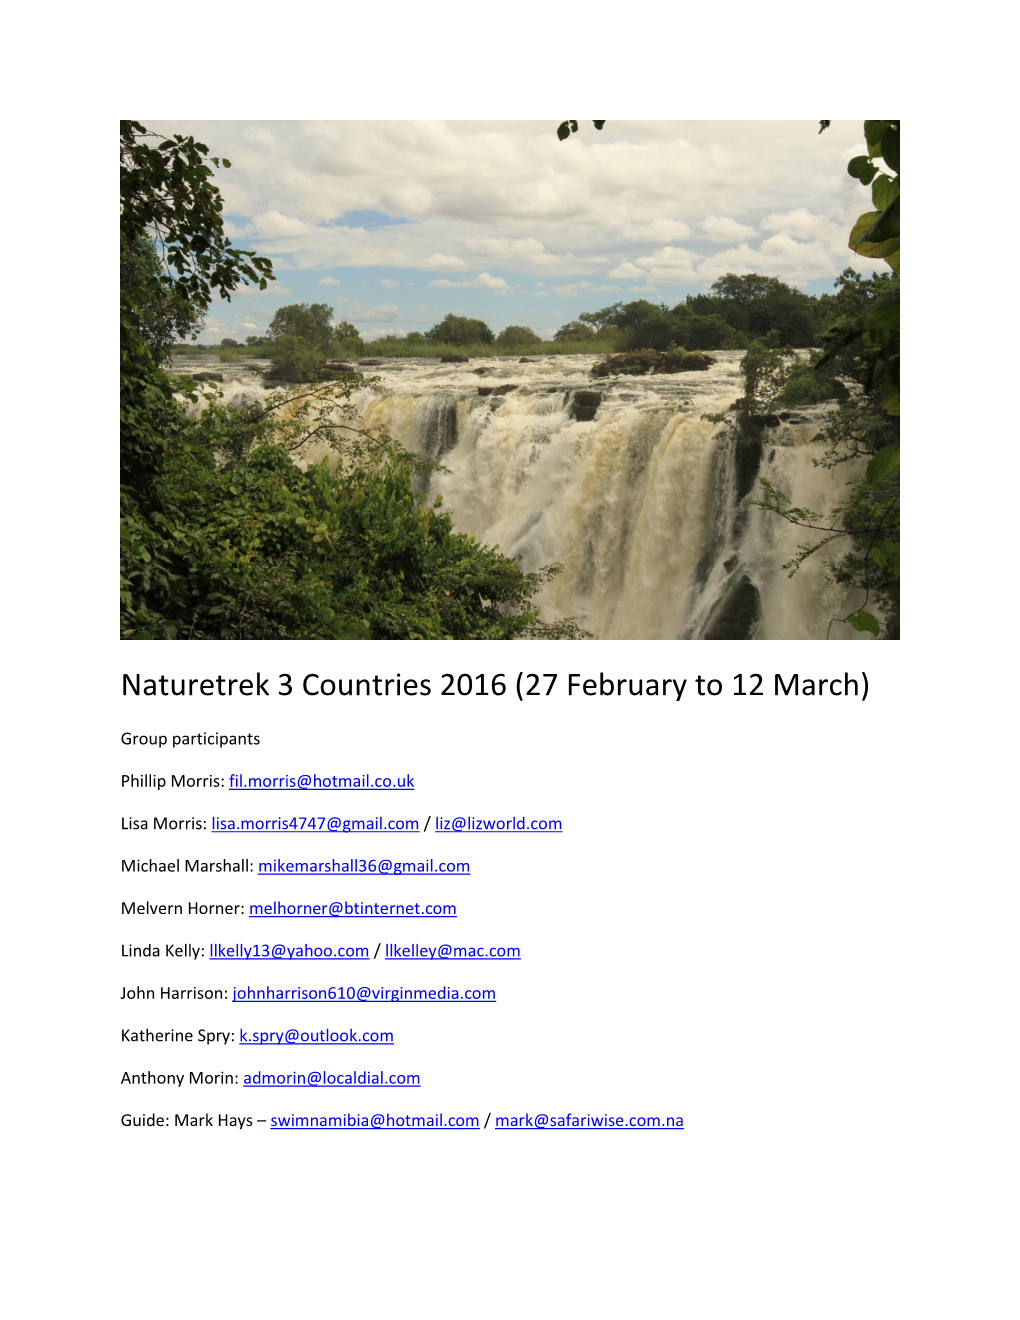 Naturetrek 3 Countries 2016 (27 February to 12 March)